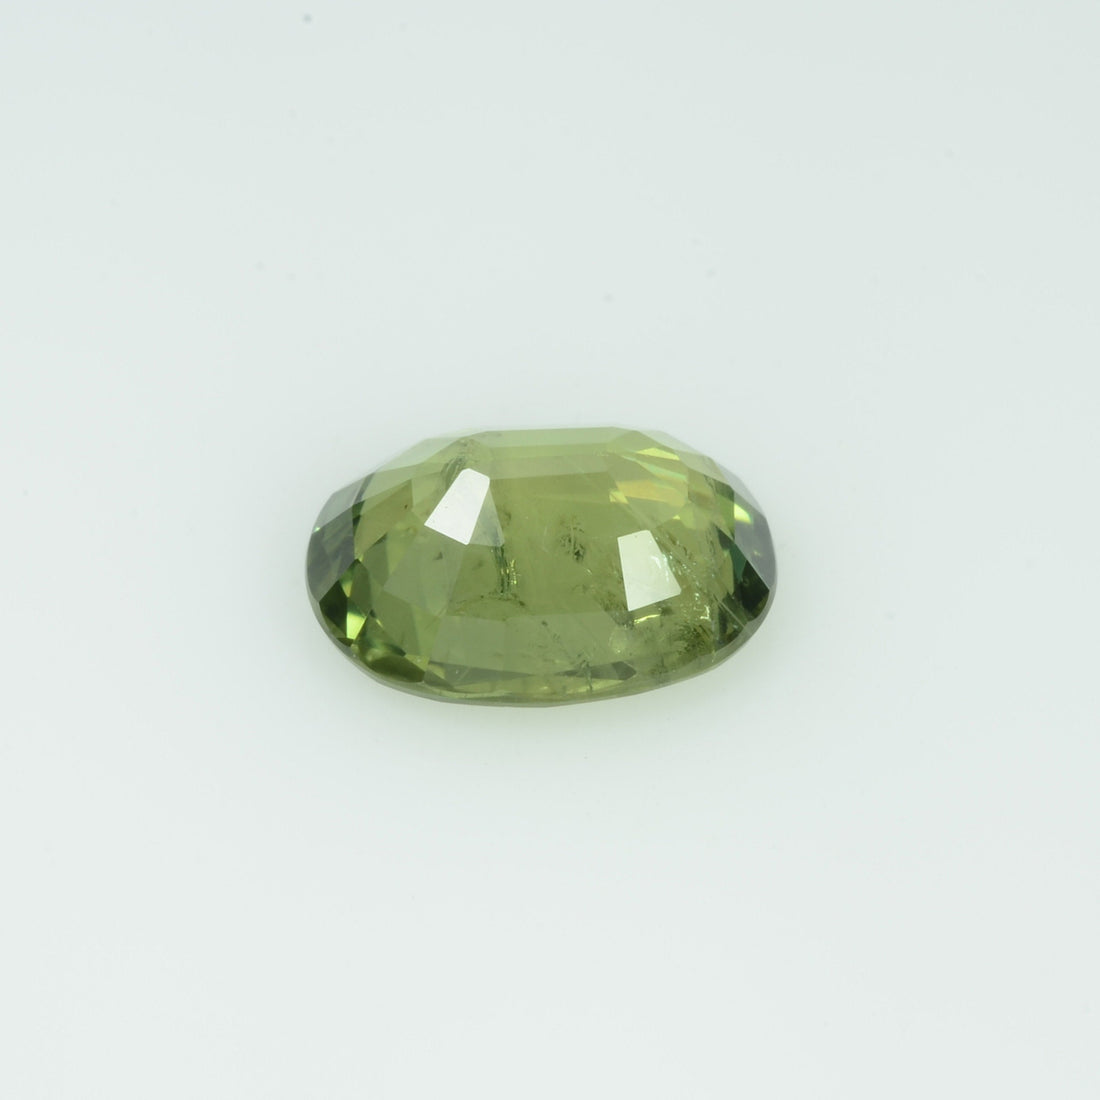 2.29 Cts Natural Green Sapphire Loose Gemstone Oval Cut